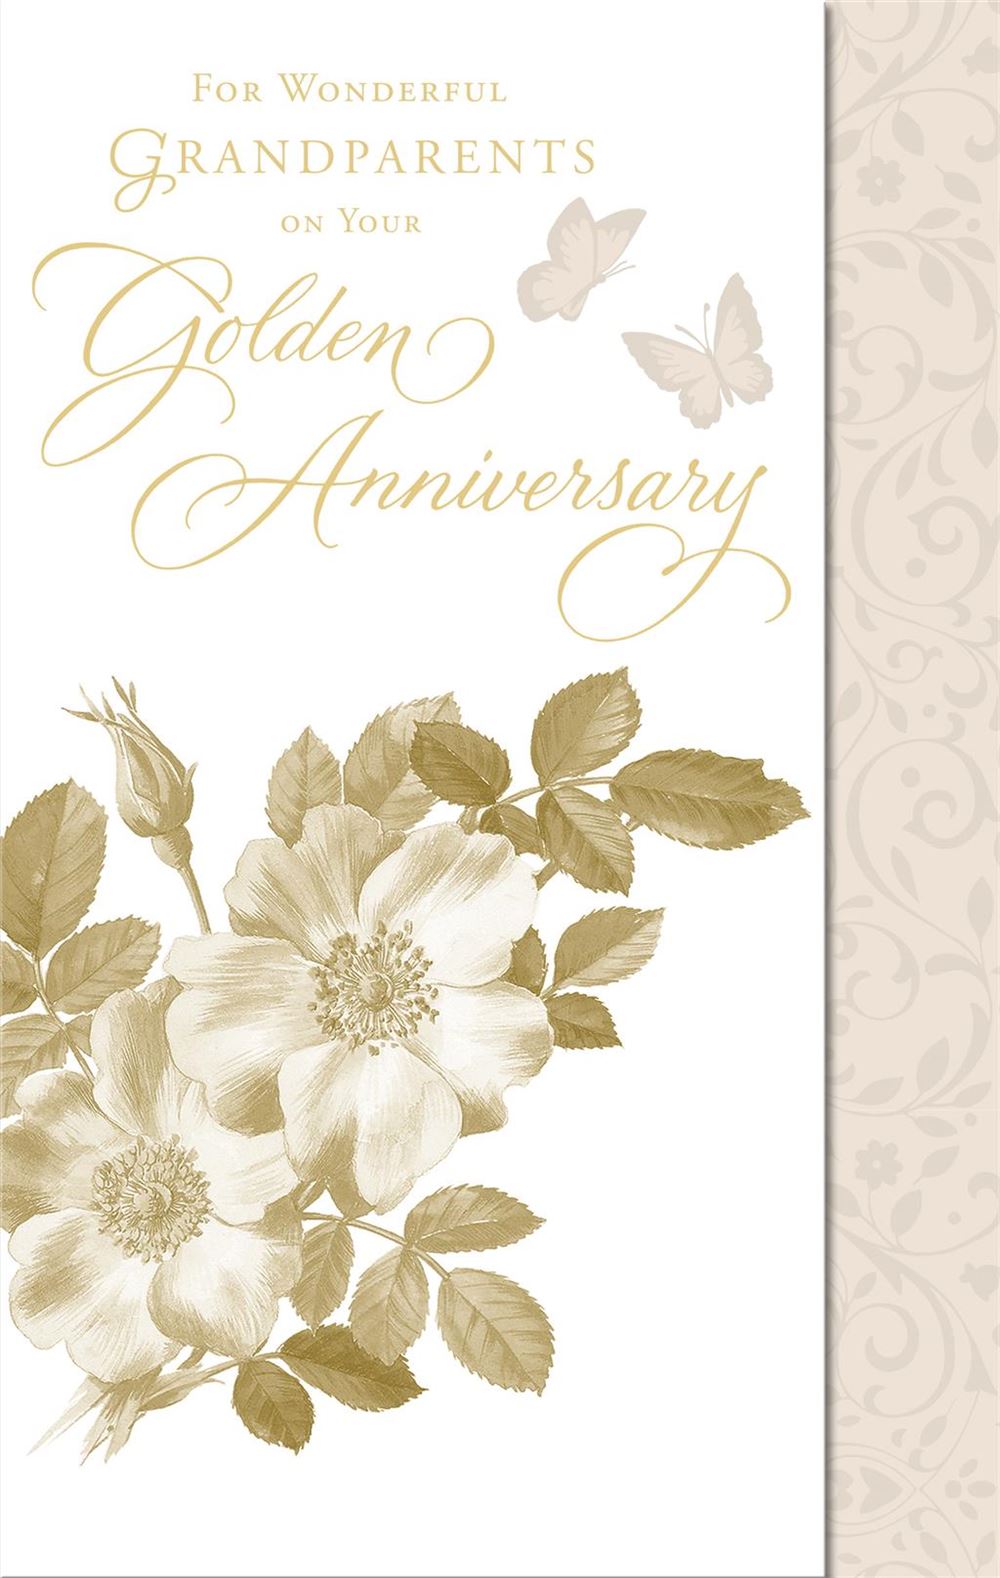 Grandparents 50th Wedding Anniversary Card - A Floral Delight